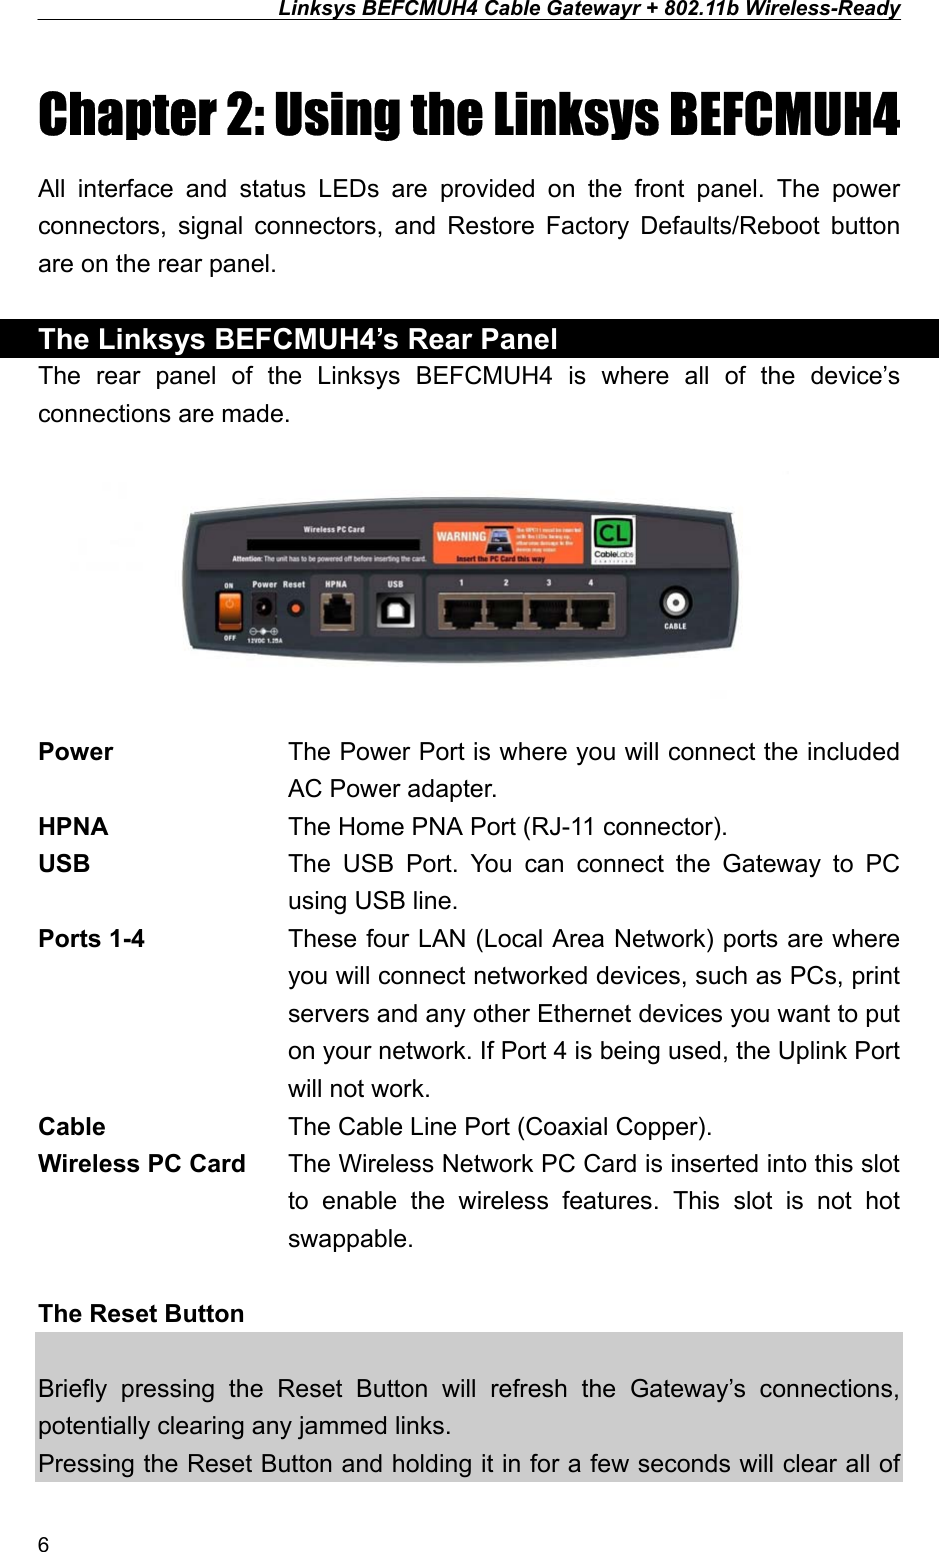 Linksys BEFCMUH4 Cable Gatewayr + 802.11b Wireless-Ready  Chapter 2: Using the Linksys BEFCMUH4 All interface and status LEDs are provided on the front panel. The power connectors, signal connectors, and Restore Factory Defaults/Reboot button are on the rear panel.  The Linksys BEFCMUH4’s Rear Panel The rear panel of the Linksys BEFCMUH4 is where all of the device’s connections are made.   Power  The Power Port is where you will connect the included AC Power adapter. HPNA    The Home PNA Port (RJ-11 connector). USB  The USB Port. You can connect the Gateway to PC using USB line. Ports 1-4  These four LAN (Local Area Network) ports are where you will connect networked devices, such as PCs, print servers and any other Ethernet devices you want to put on your network. If Port 4 is being used, the Uplink Port will not work. Cable    The Cable Line Port (Coaxial Copper). Wireless PC Card  The Wireless Network PC Card is inserted into this slot to enable the wireless features. This slot is not hot swappable.  The Reset Button    Briefly pressing the Reset Button will refresh the Gateway’s connections, potentially clearing any jammed links. Pressing the Reset Button and holding it in for a few seconds will clear all of 6 